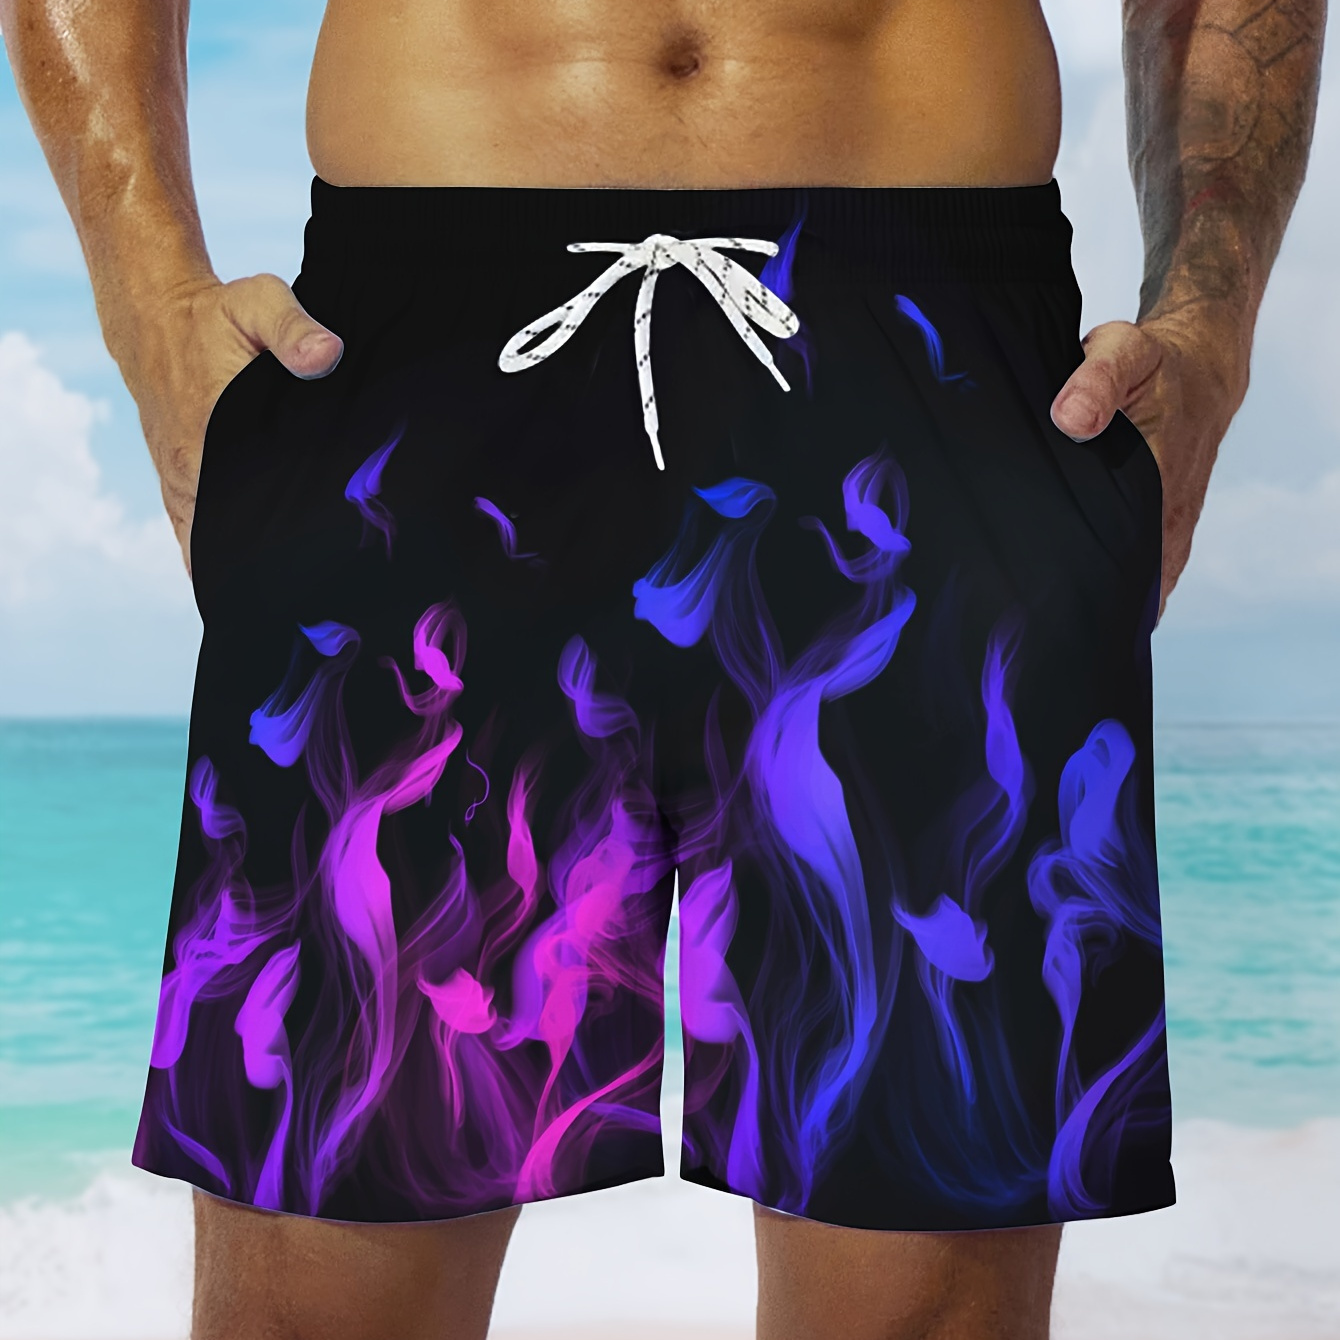 

Plus Size Men's Smog Graphic Print Shorts For Summer, Trendy Casual Board Shorts For Males